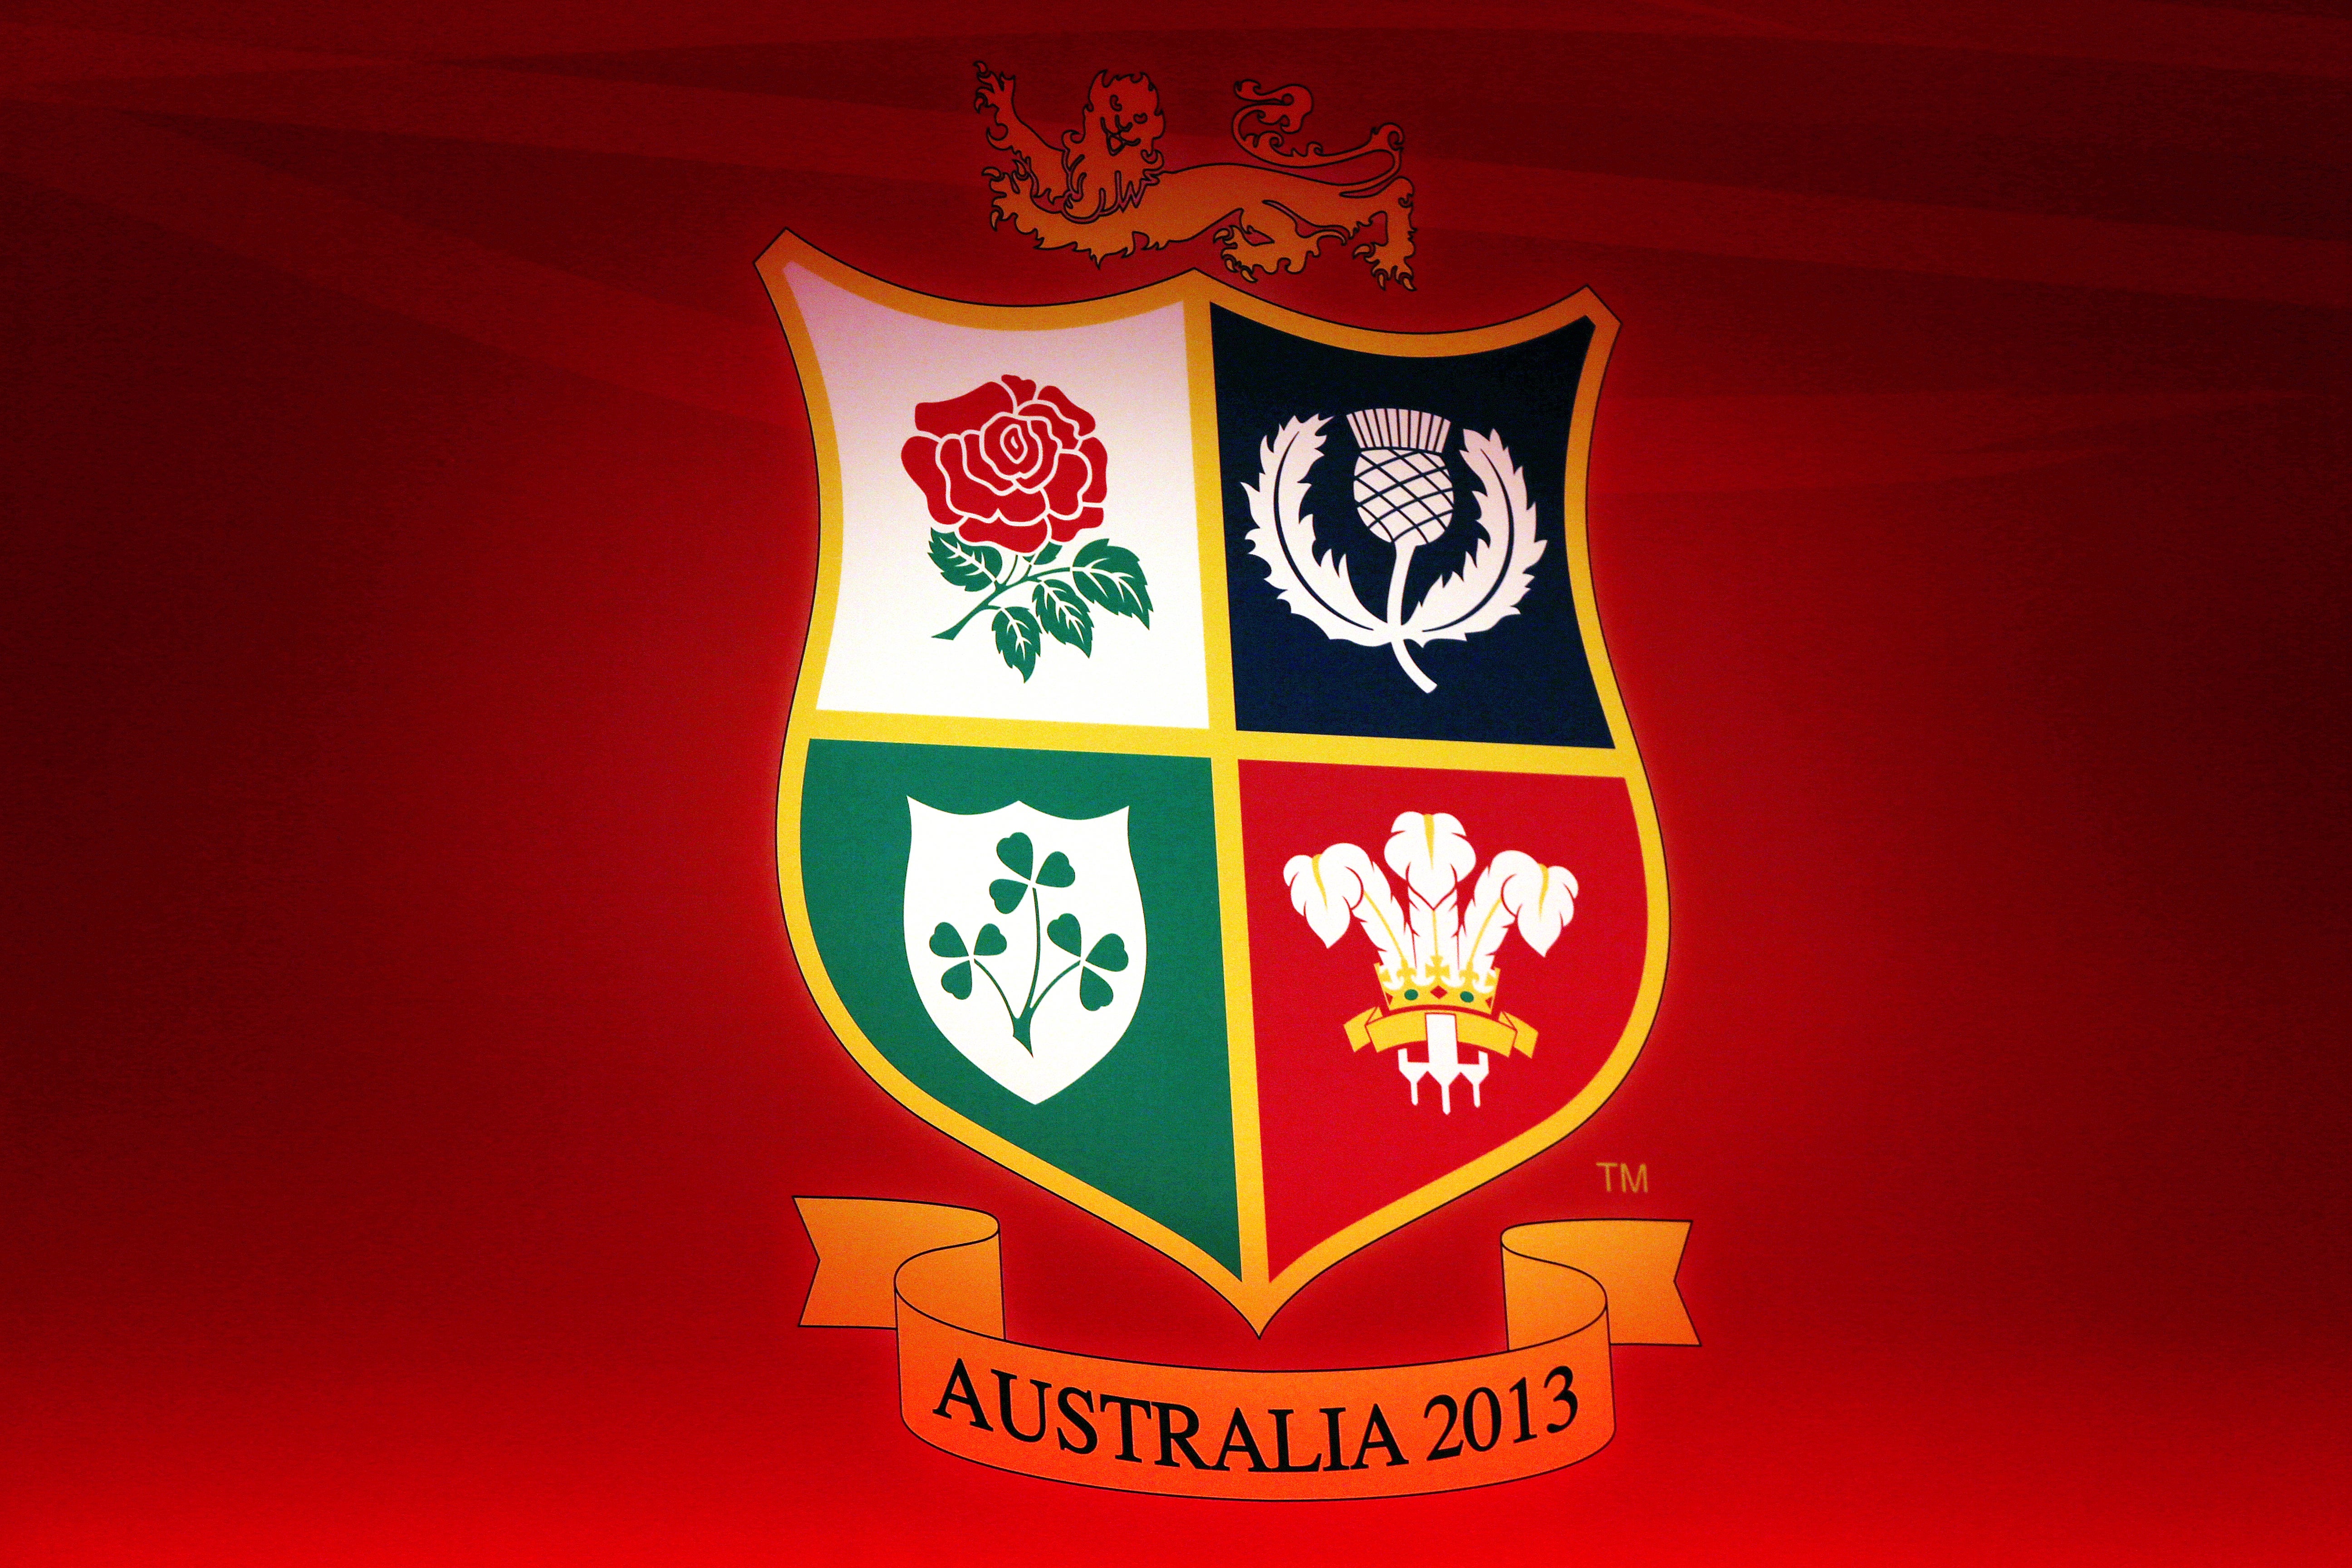 A member of the British and Irish Lions management team has tested positive for coronavirus